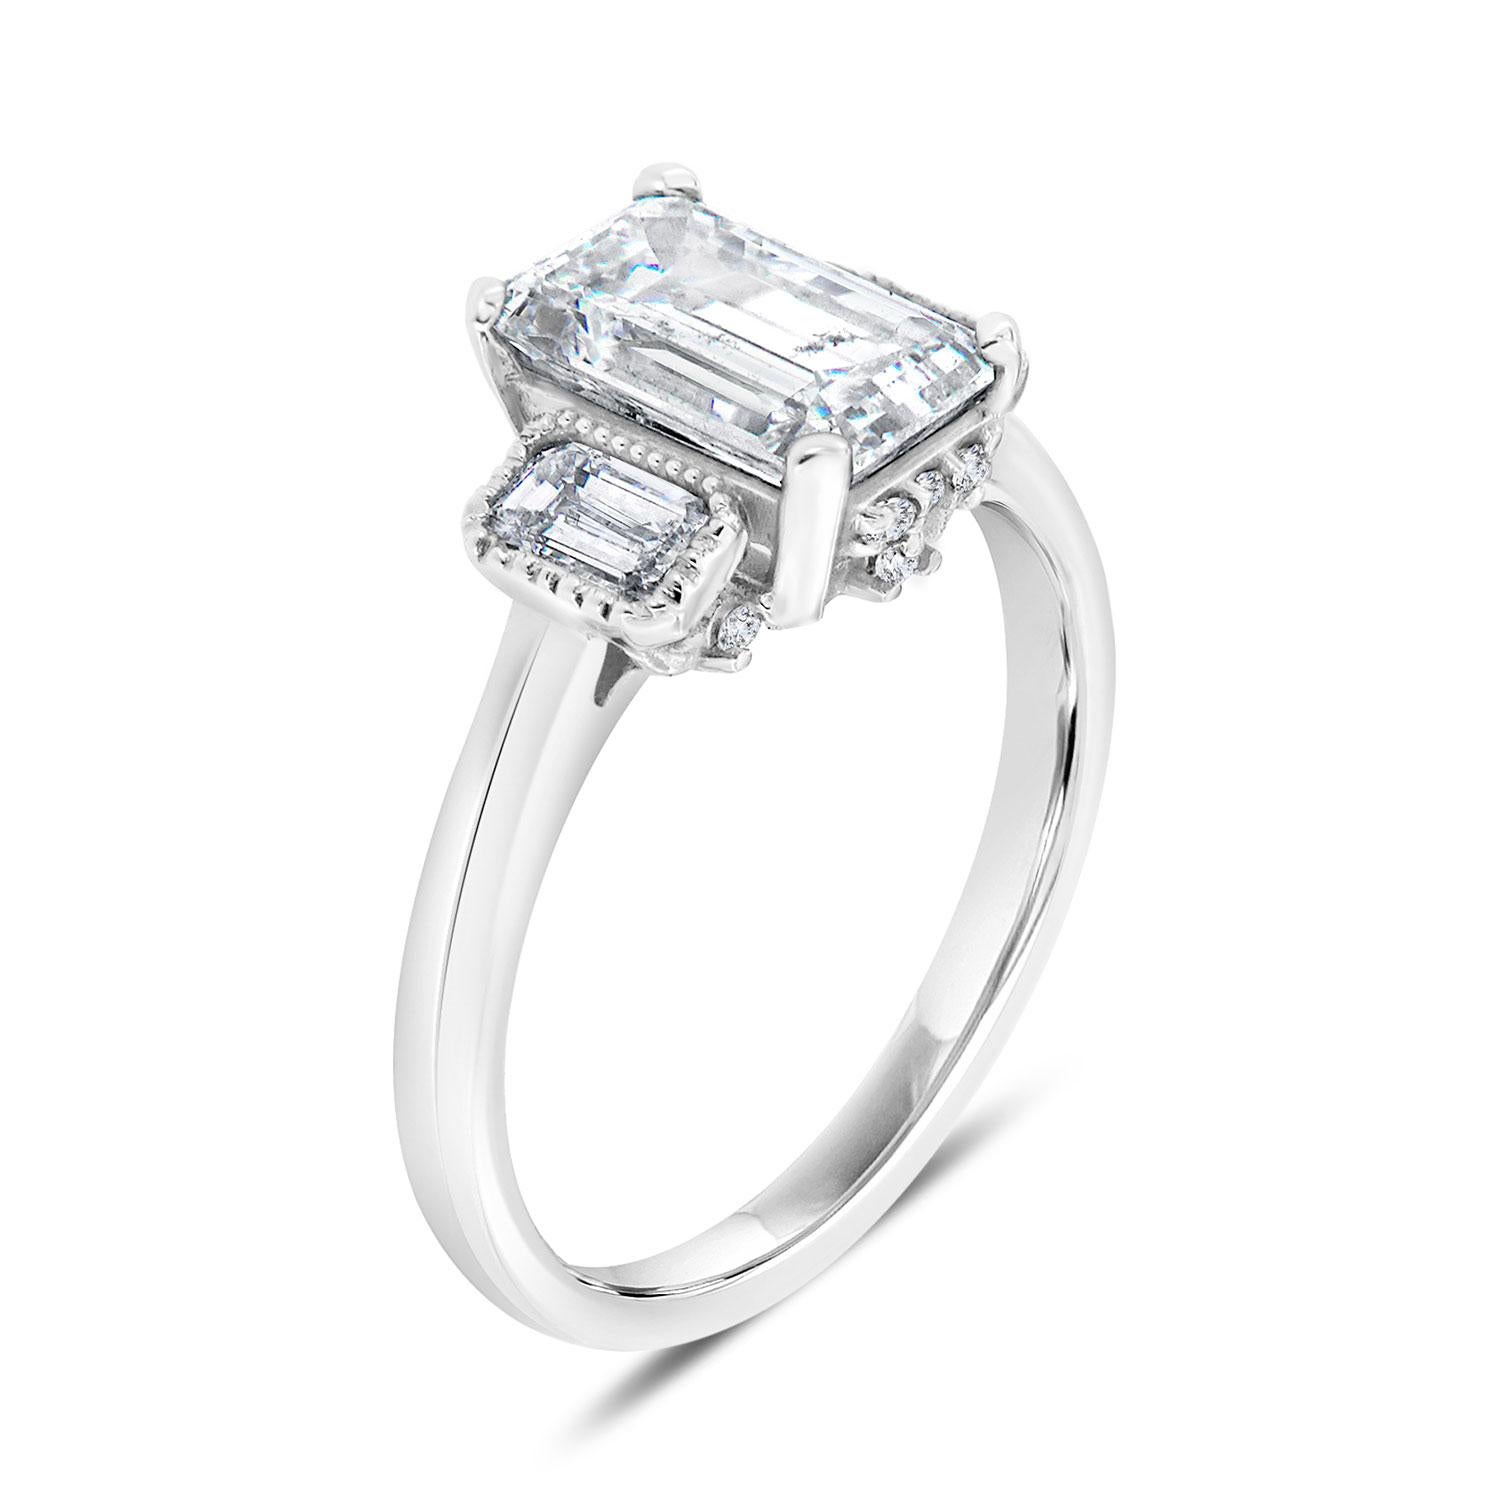 This 14k white gold three-stone ring features a 1.63 carat Emerald cut diamond flanked by two perfectly matched 0.39-carat emerald cut diamonds bezel set with ha delicate Milgrain design around on a 2 mm wide band. We embedded six (6) brilliant